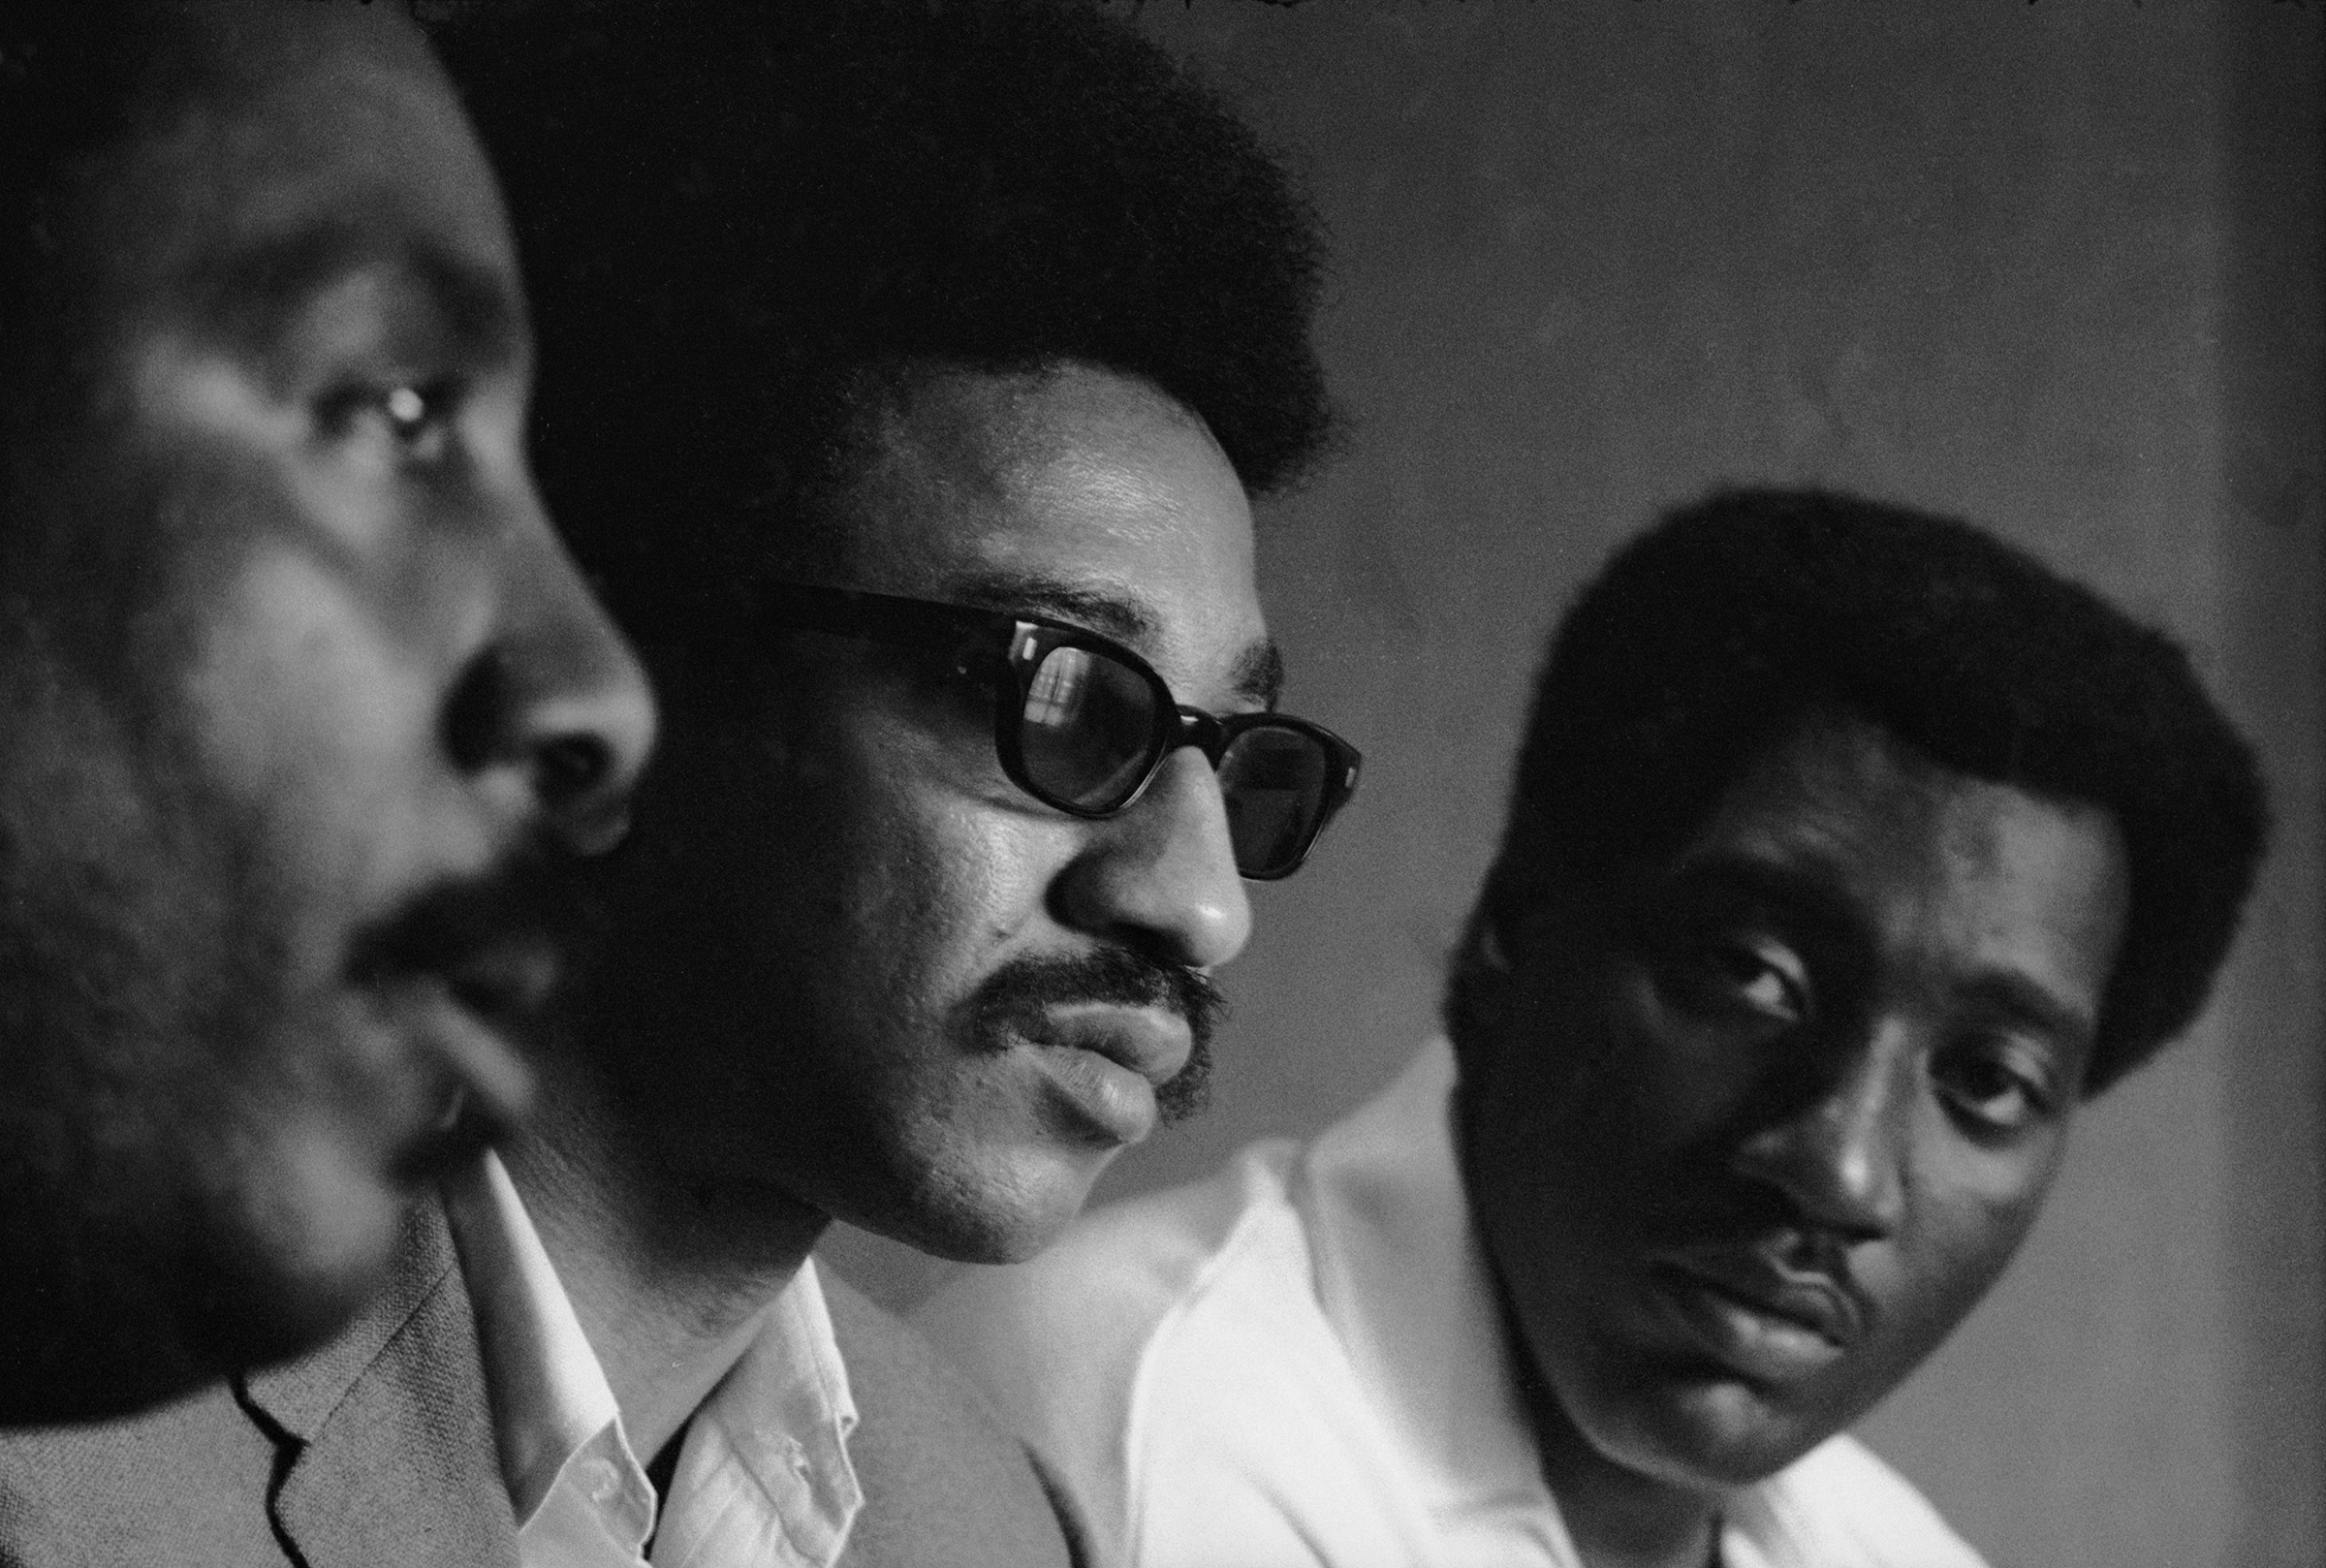 Civil rights activist Dick Gregory, left, and musician Otis Redding flank H. Rap Brown at an August 1967 convention in Atlanta (Vernon Merritt III—Getty Images)